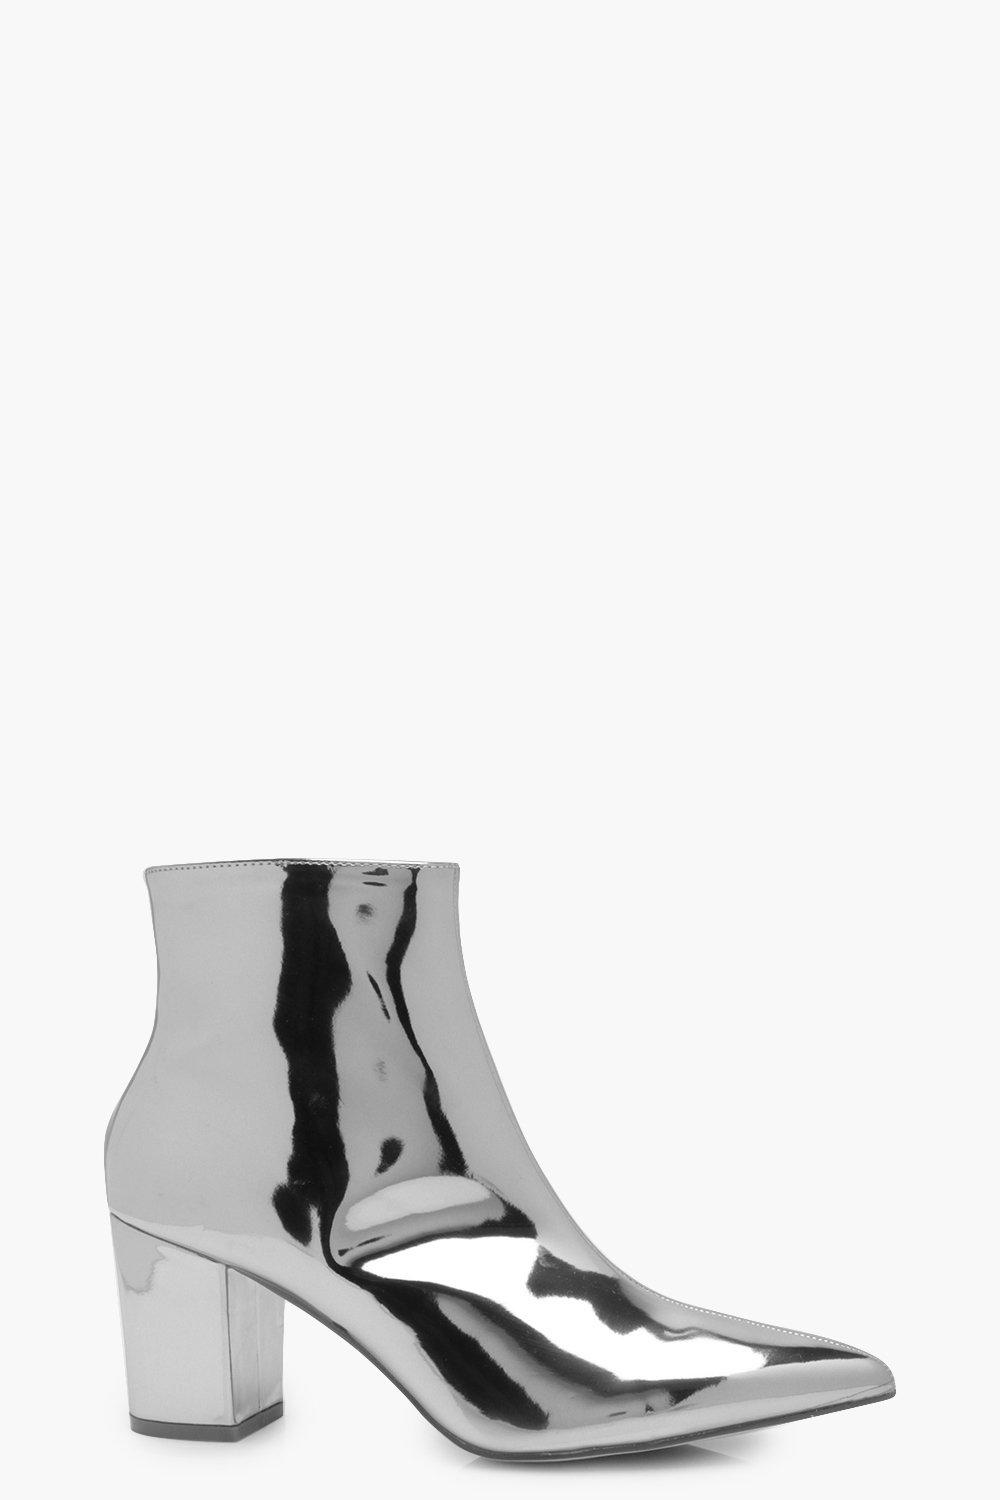 Freya Metallic Pointed Ankle Boots 